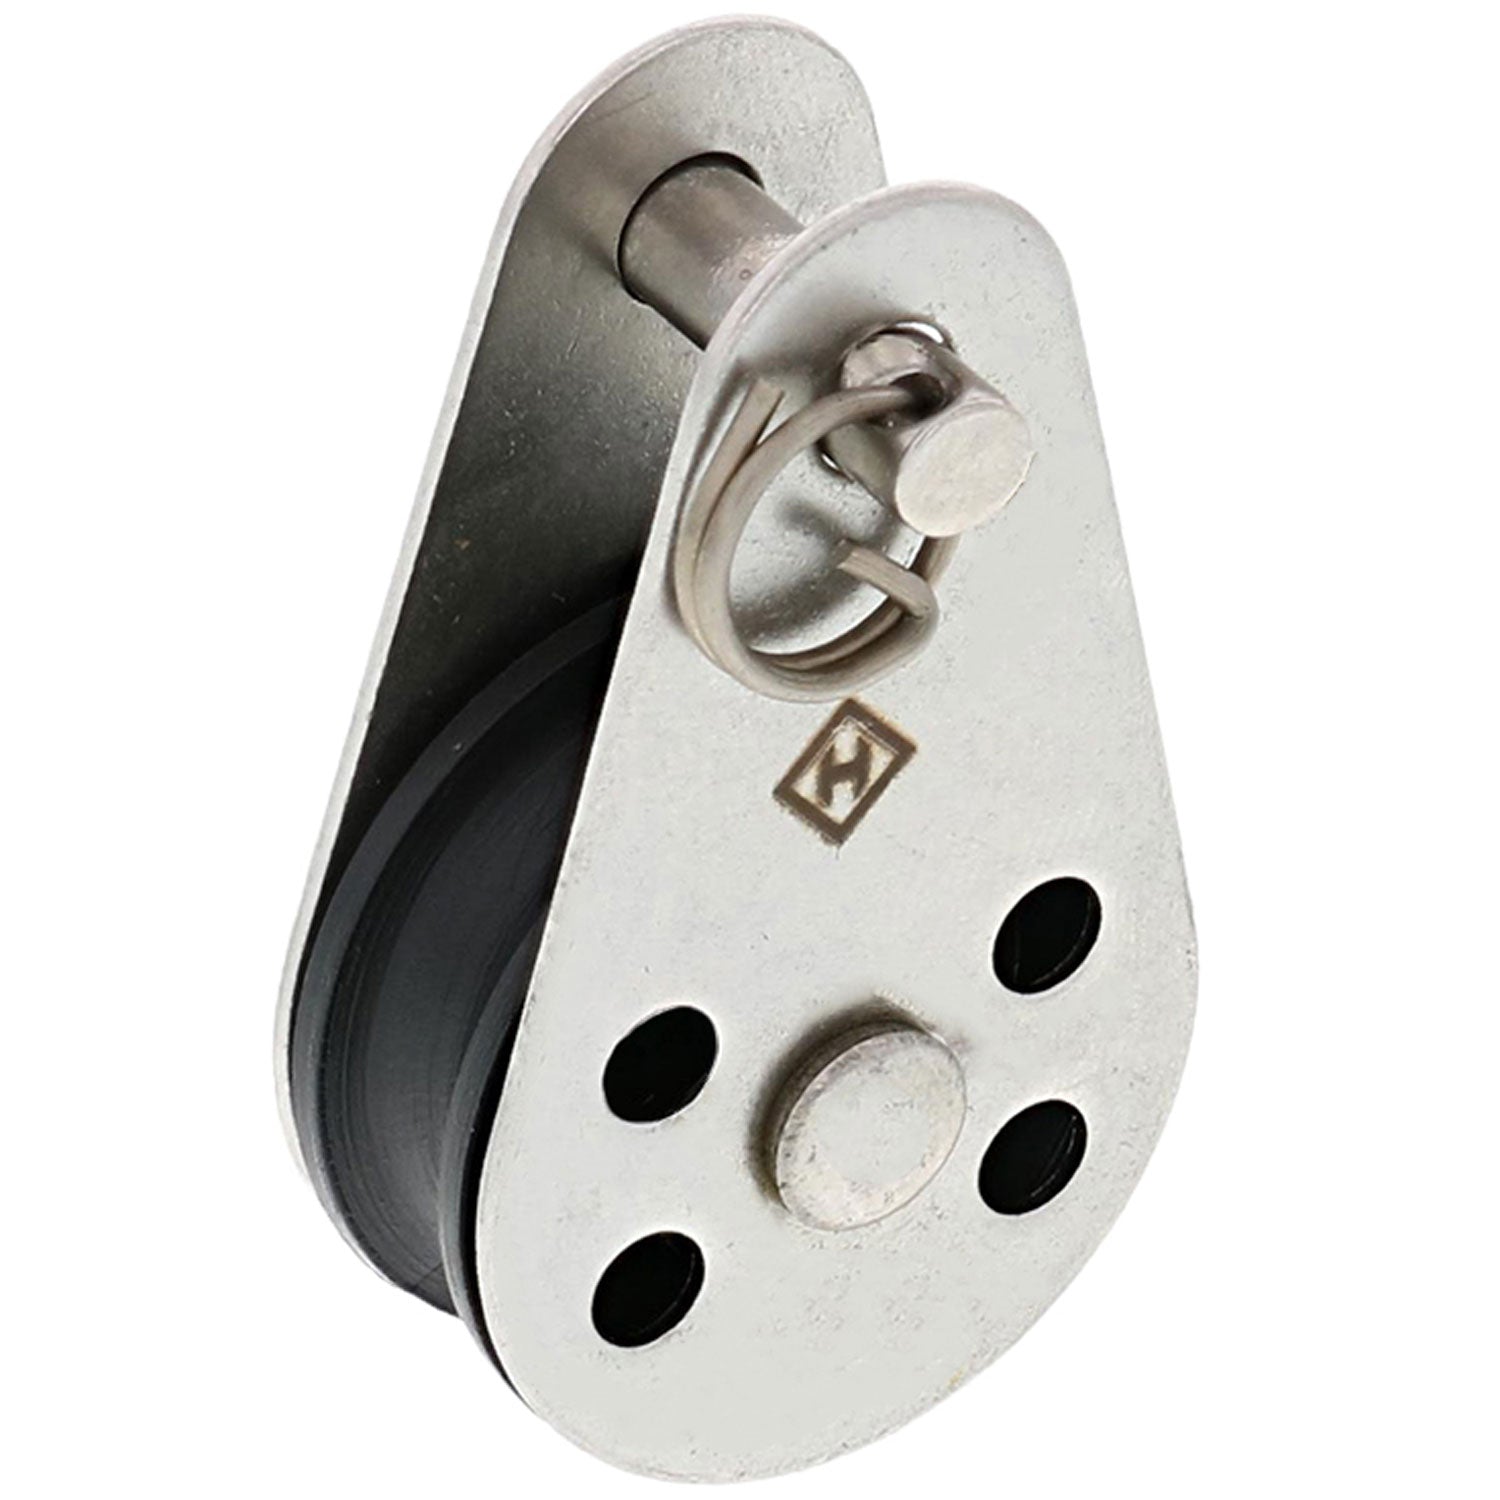 25mm Stainless Steel marine grade PULLEY BLOCK With Nylon Sheave REMOVABLE PIN 